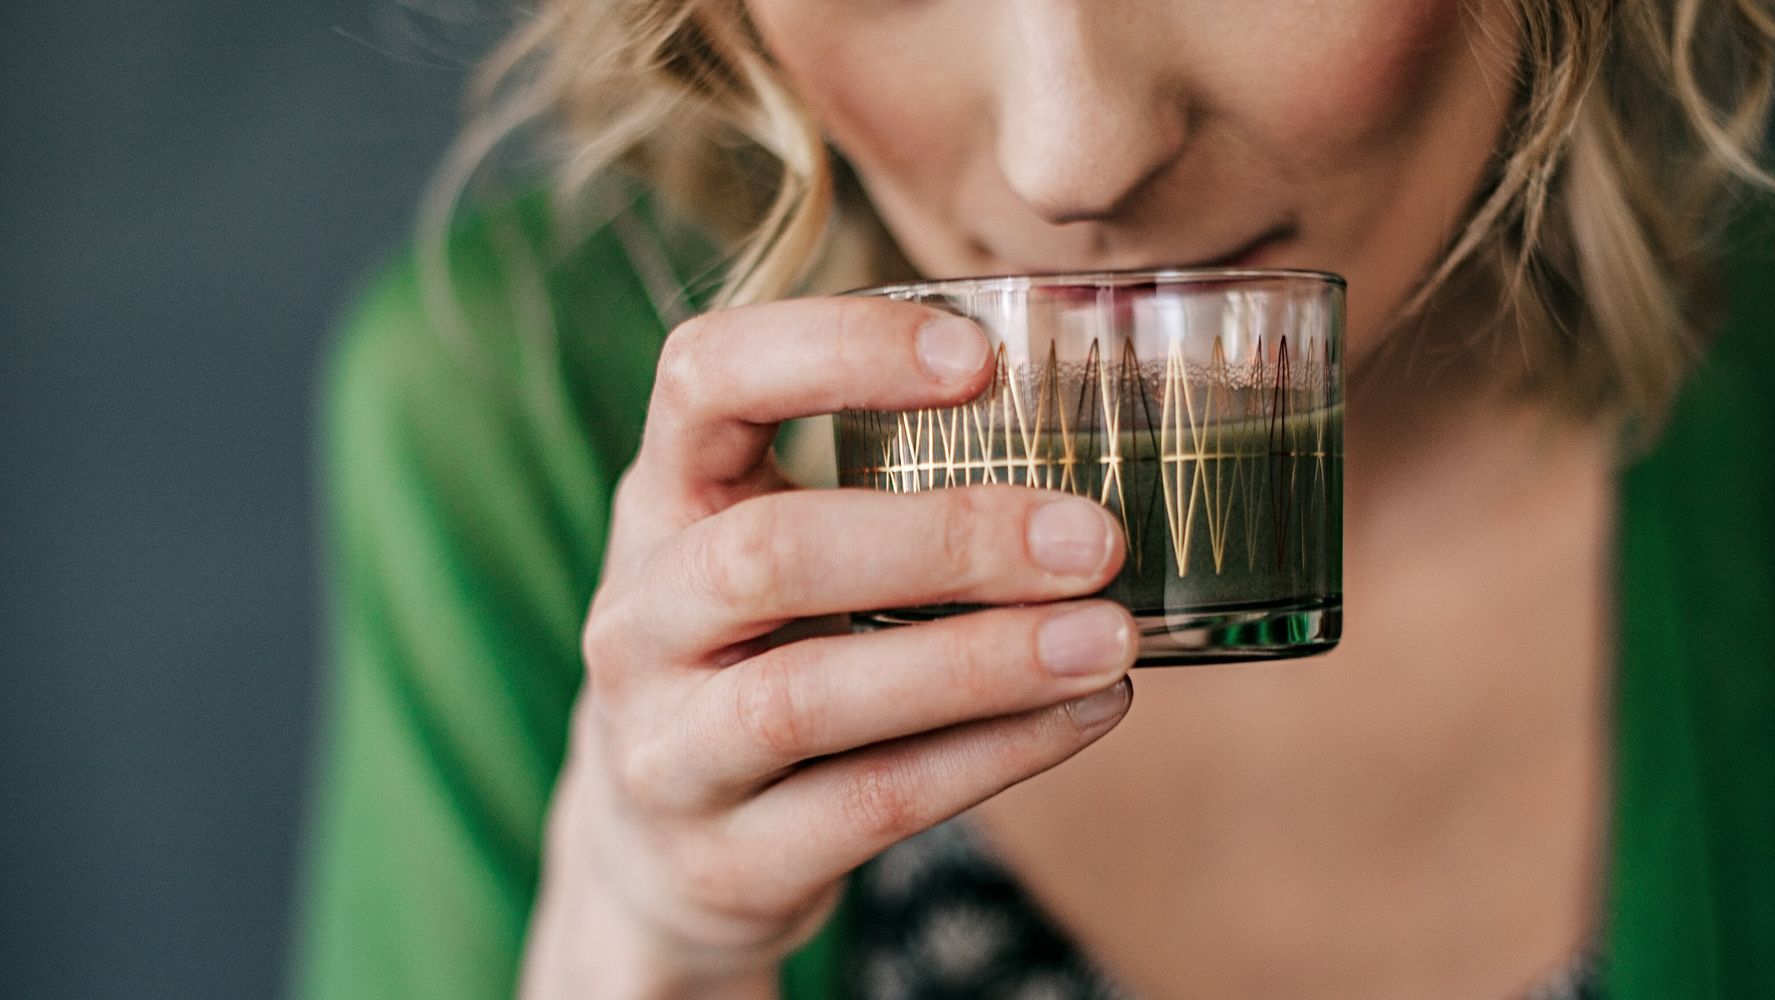 Chlorophyll Water Is All Over TikTok. But Is It Actually Good For You?